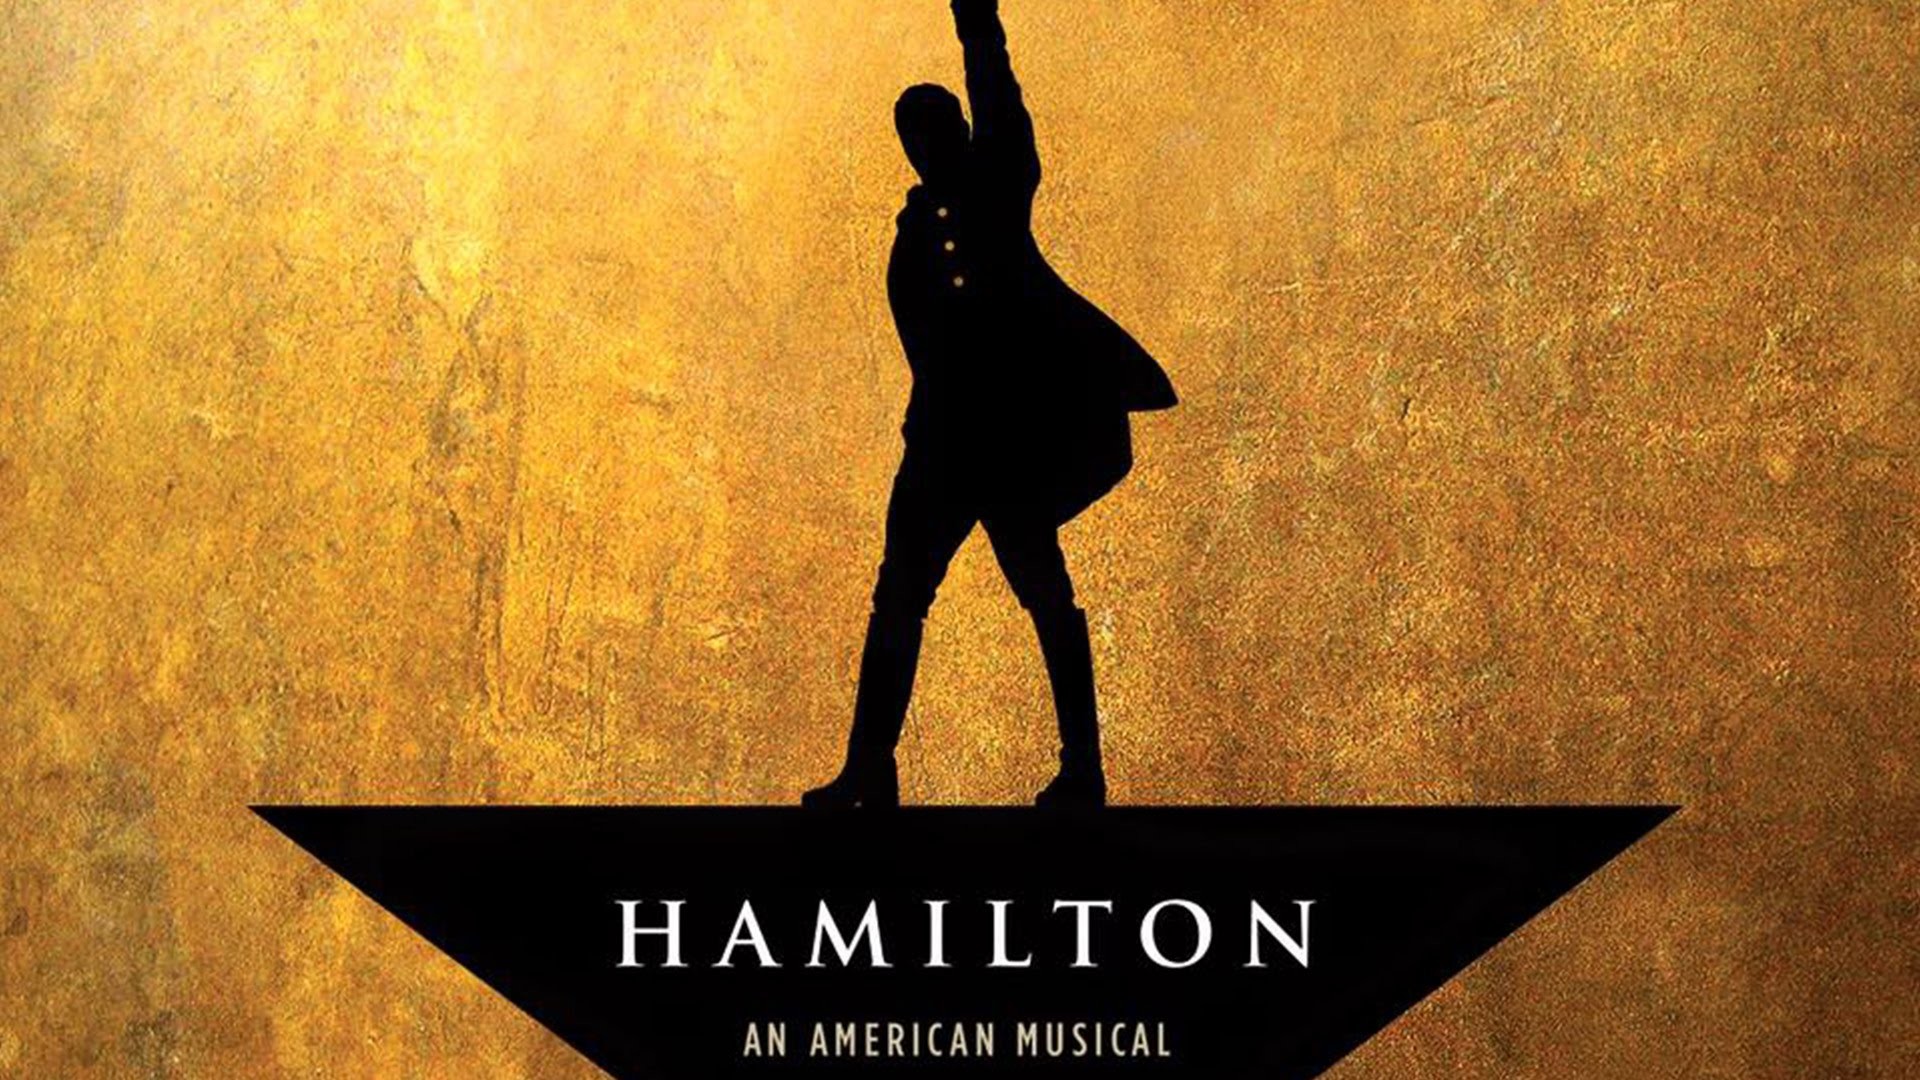 1920x1080 Hamilton the musical, directed by Thomas Kail, is the story about alexander  Hamilton. Its about the founding father and first secretary of treasury, ...